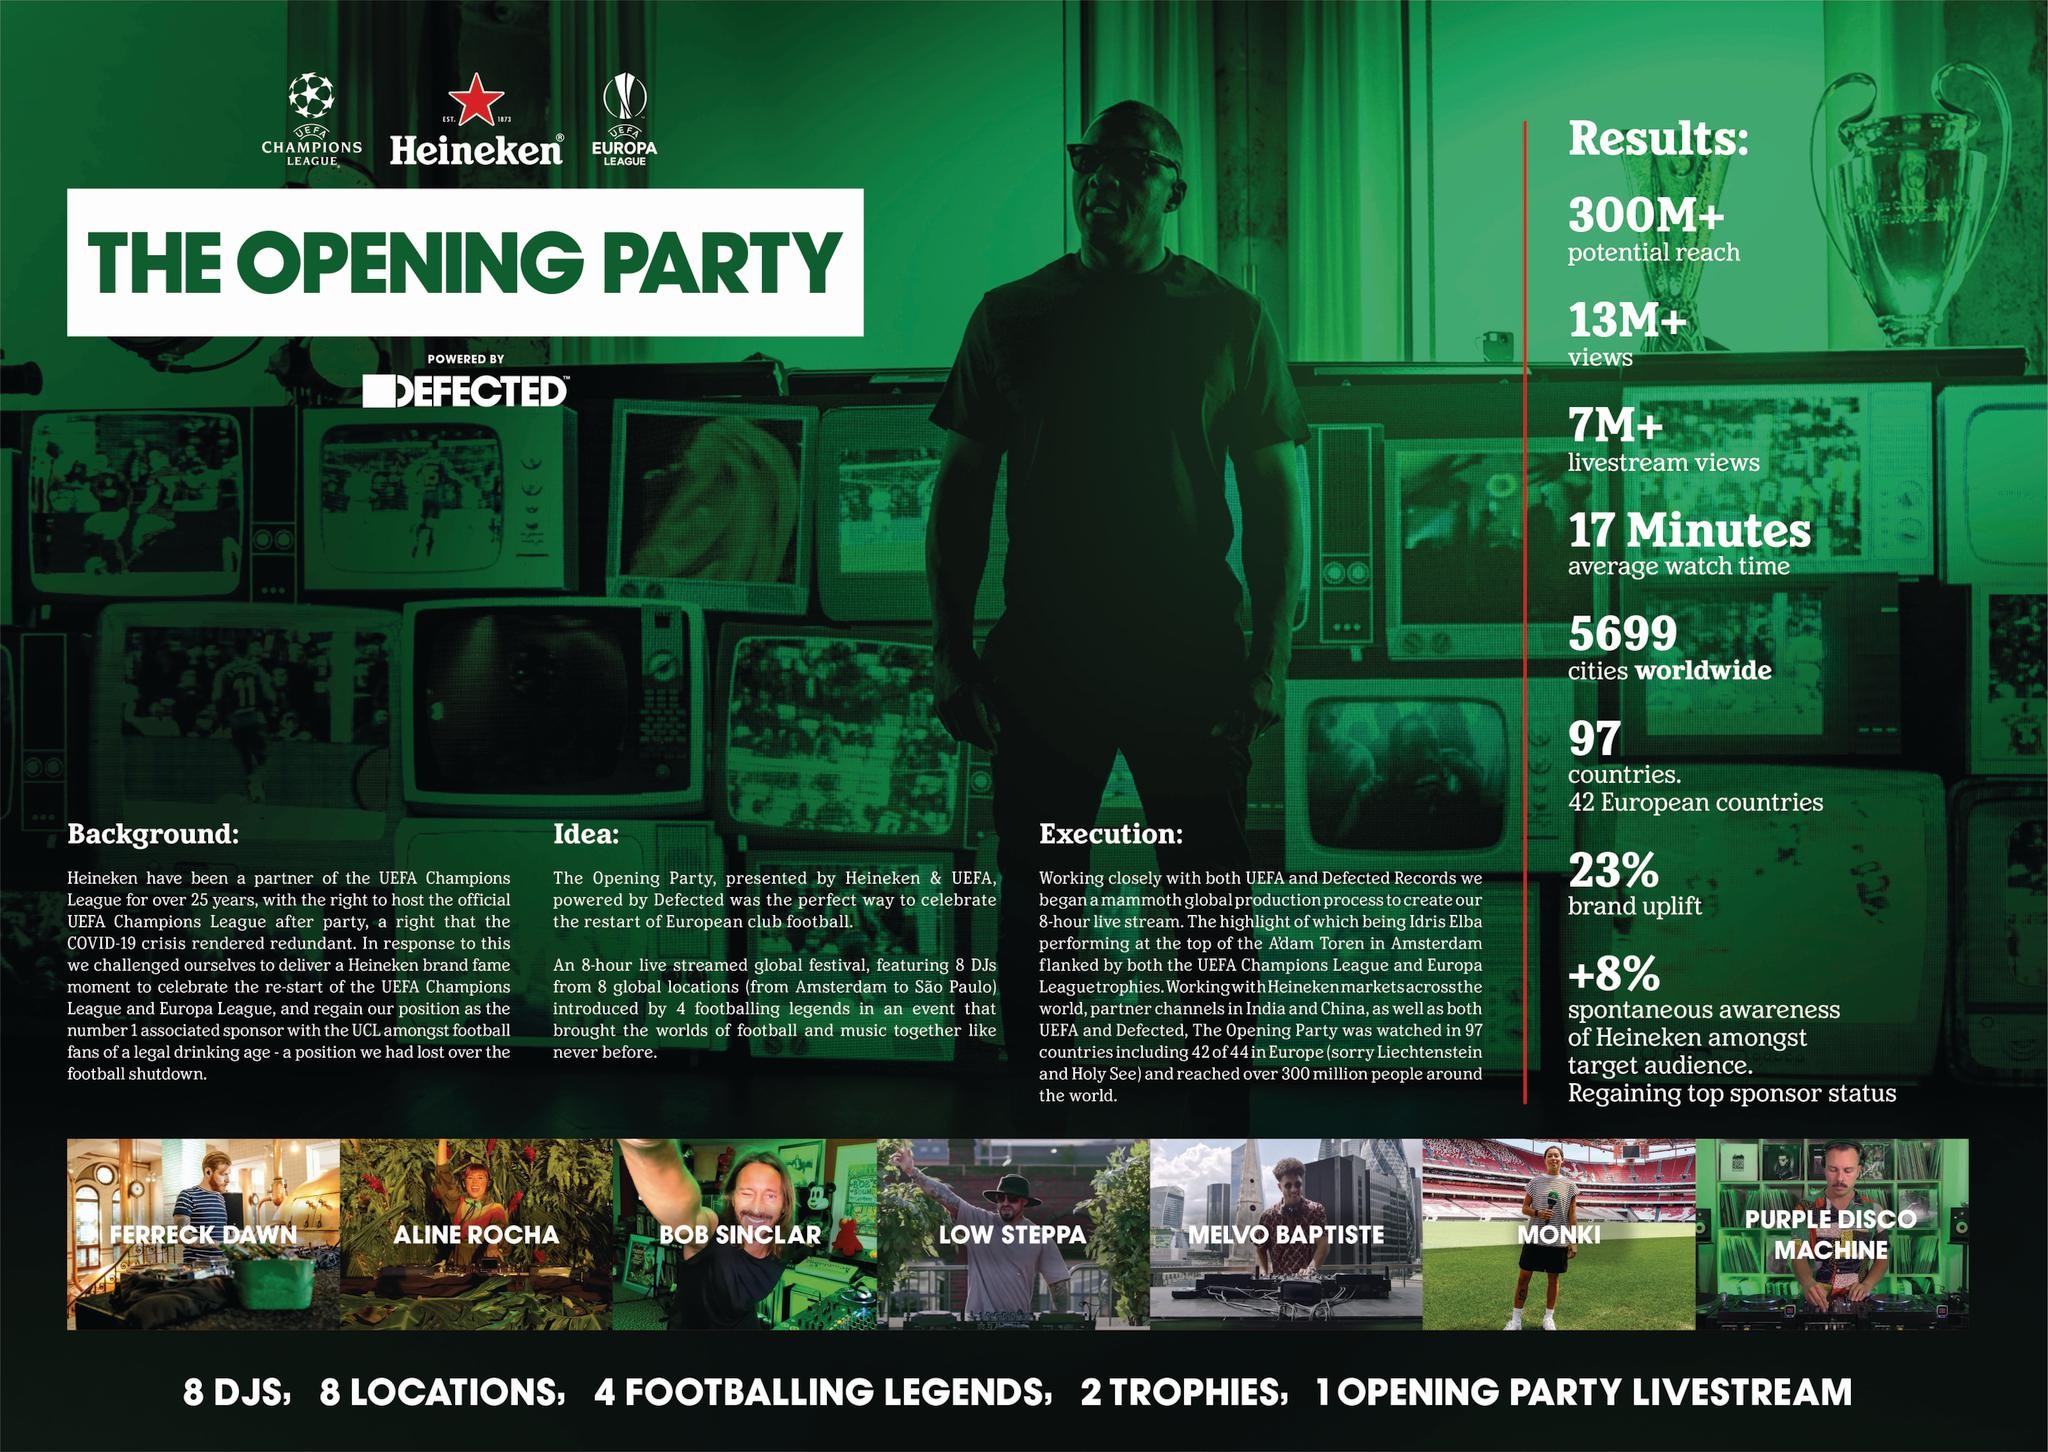 Heineken and UEFA present the Opening Party powered by Defected